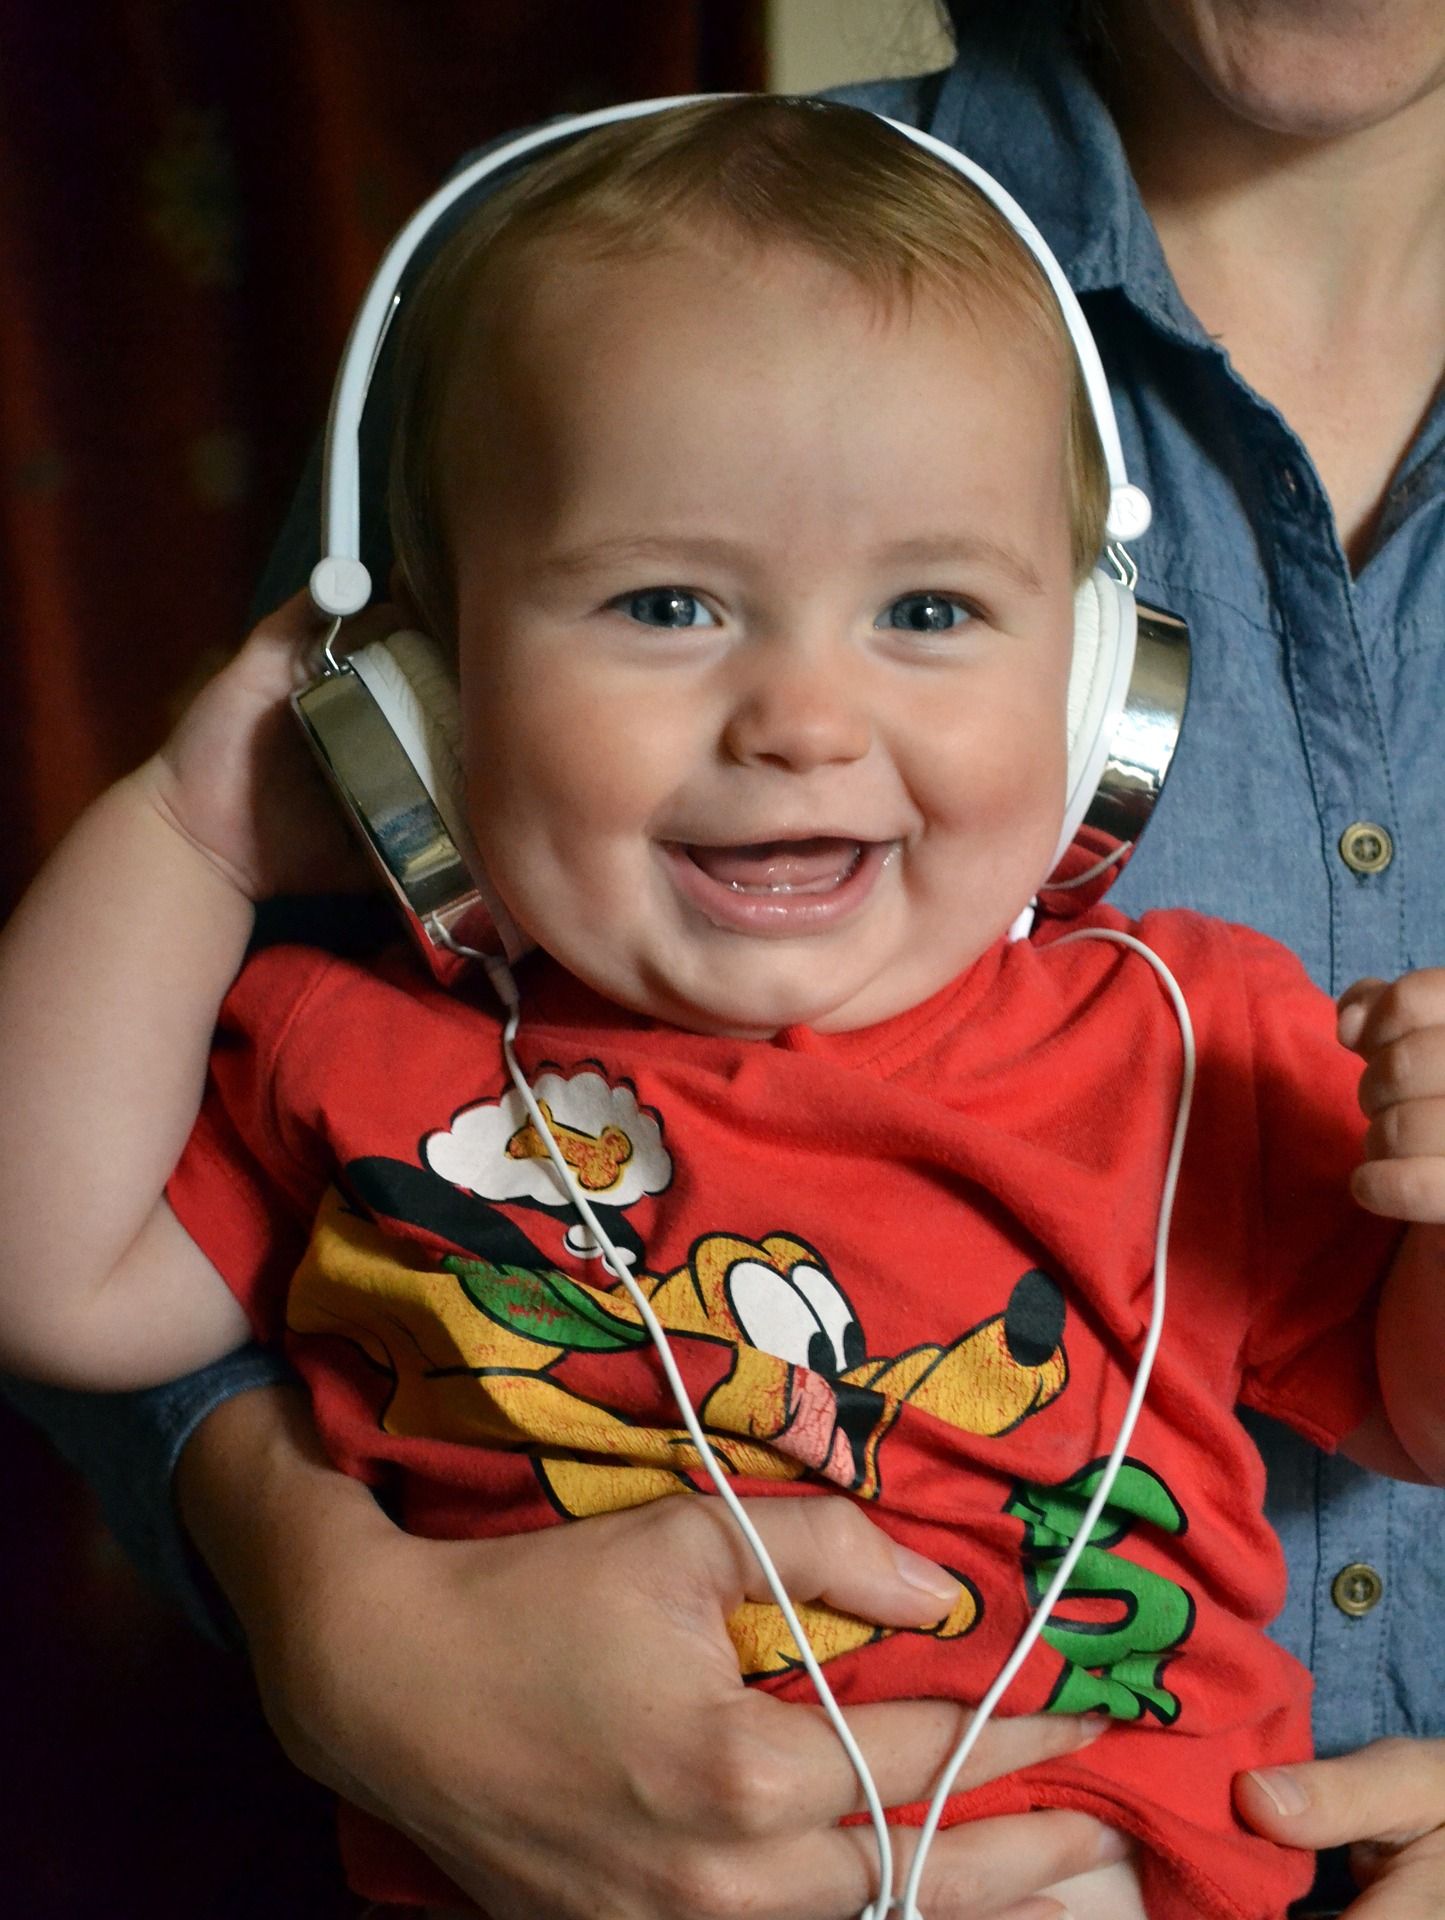 Music encourages babies to move and walk